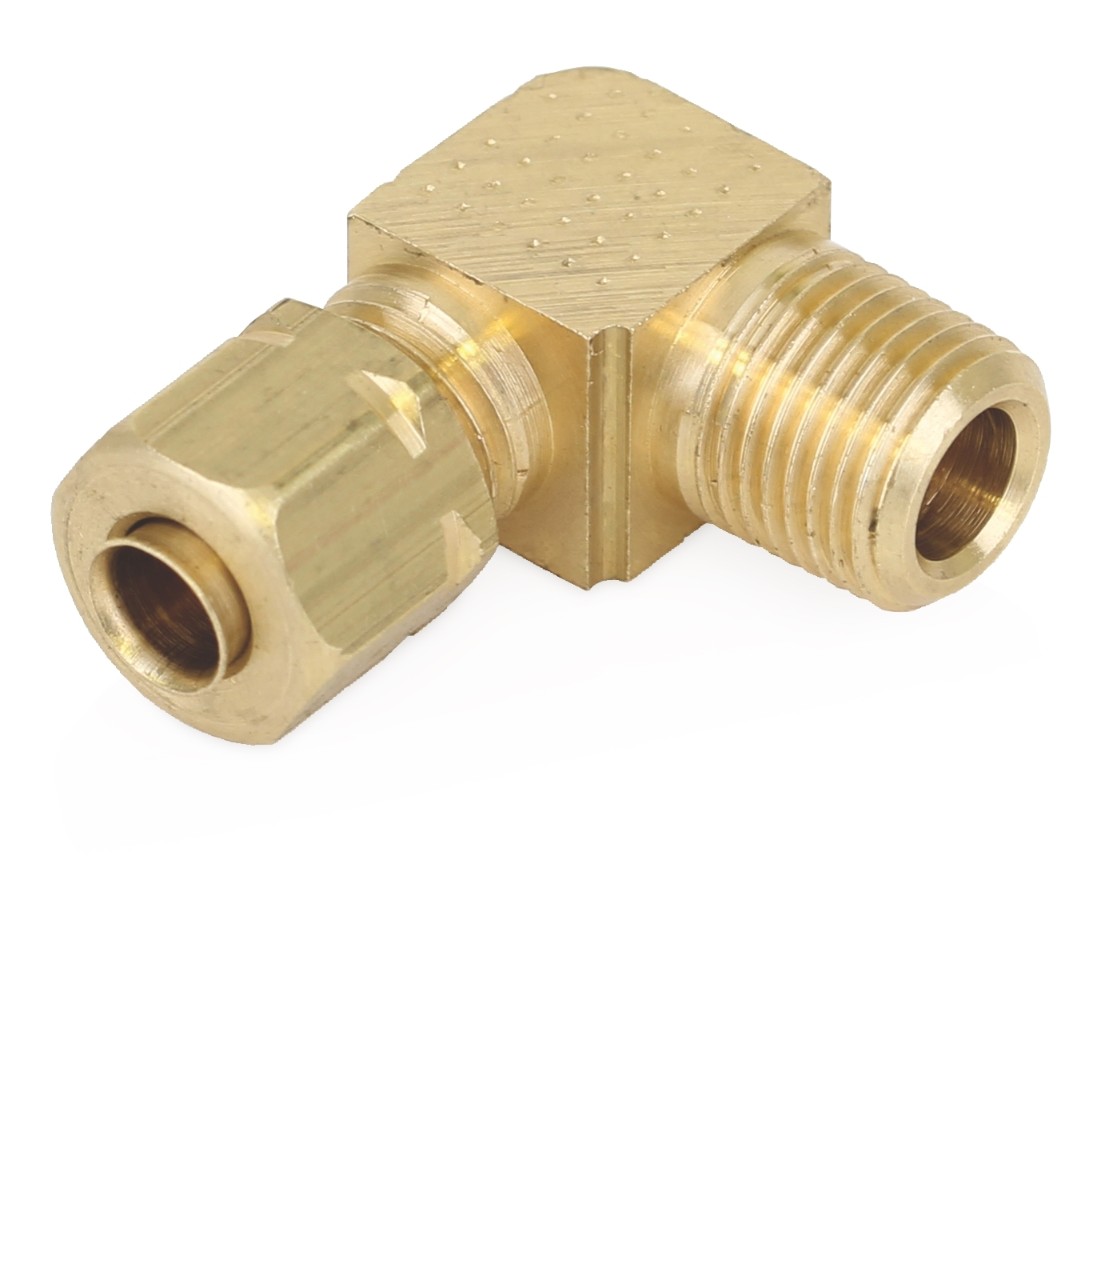 Fitting - Brass Male Tube Elbows 3/16 in. (4.8 mm) Tube x 1/8 in. (3.2 mm)  NPTF